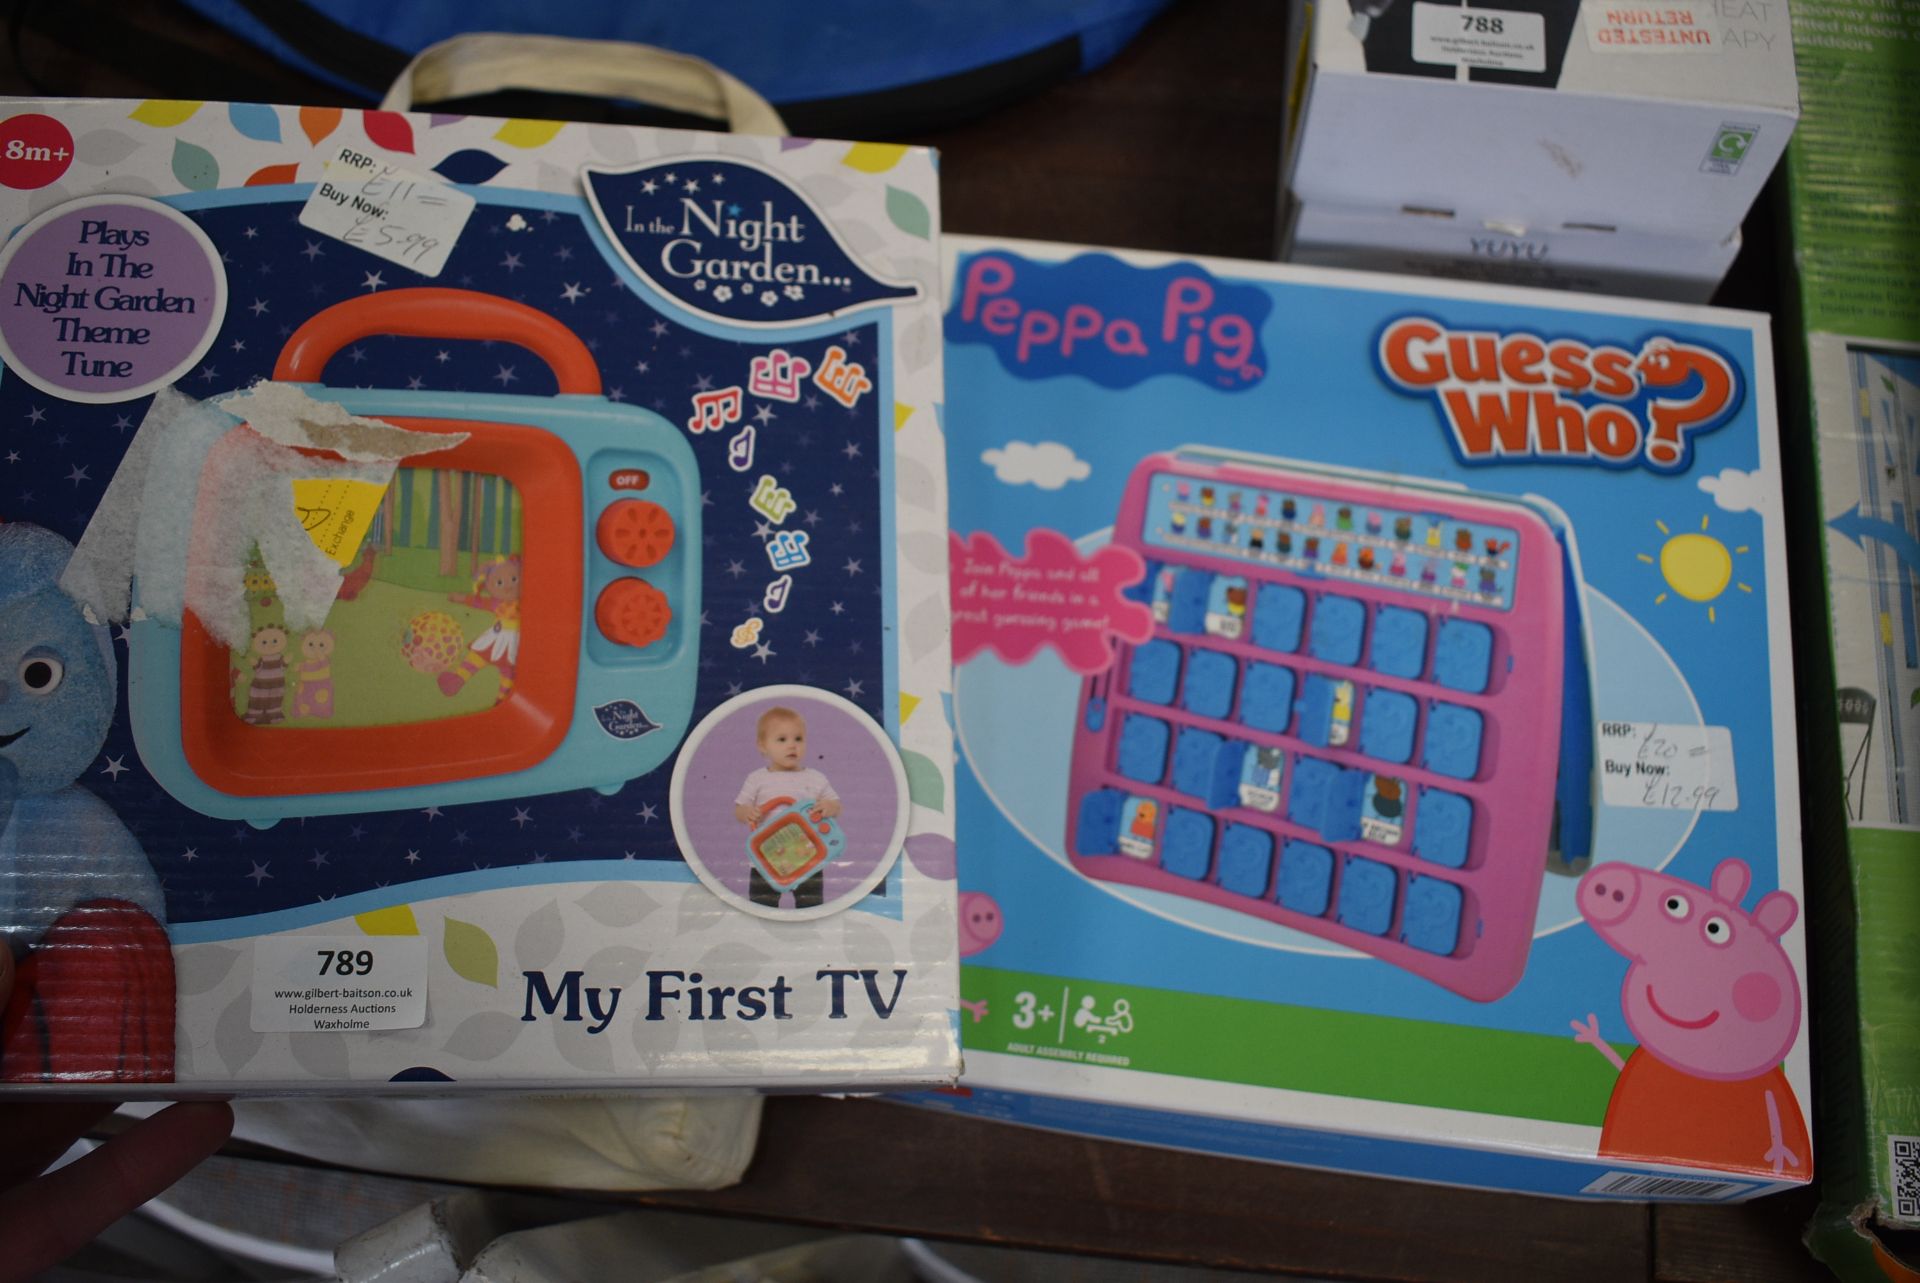 My First TV and Peppa Pig Guess Who